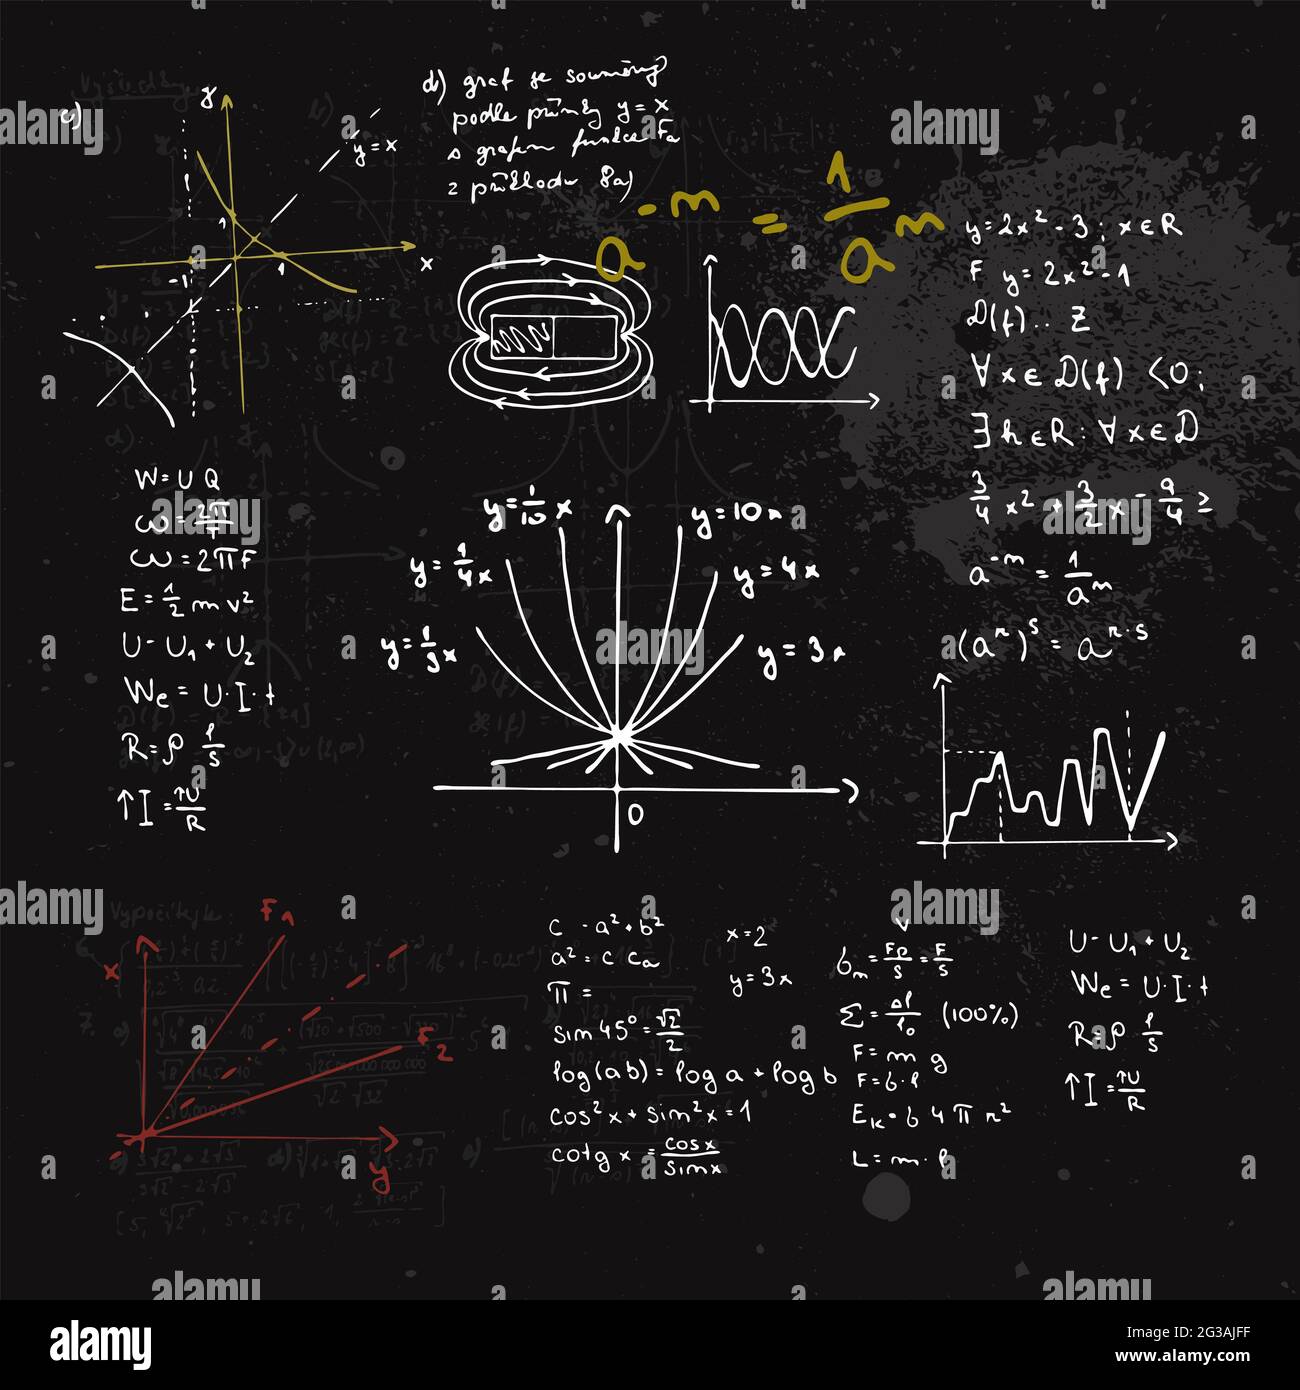 Handwritten mathematical formulas and graphs. Blackboard with calculations. Stock Photo